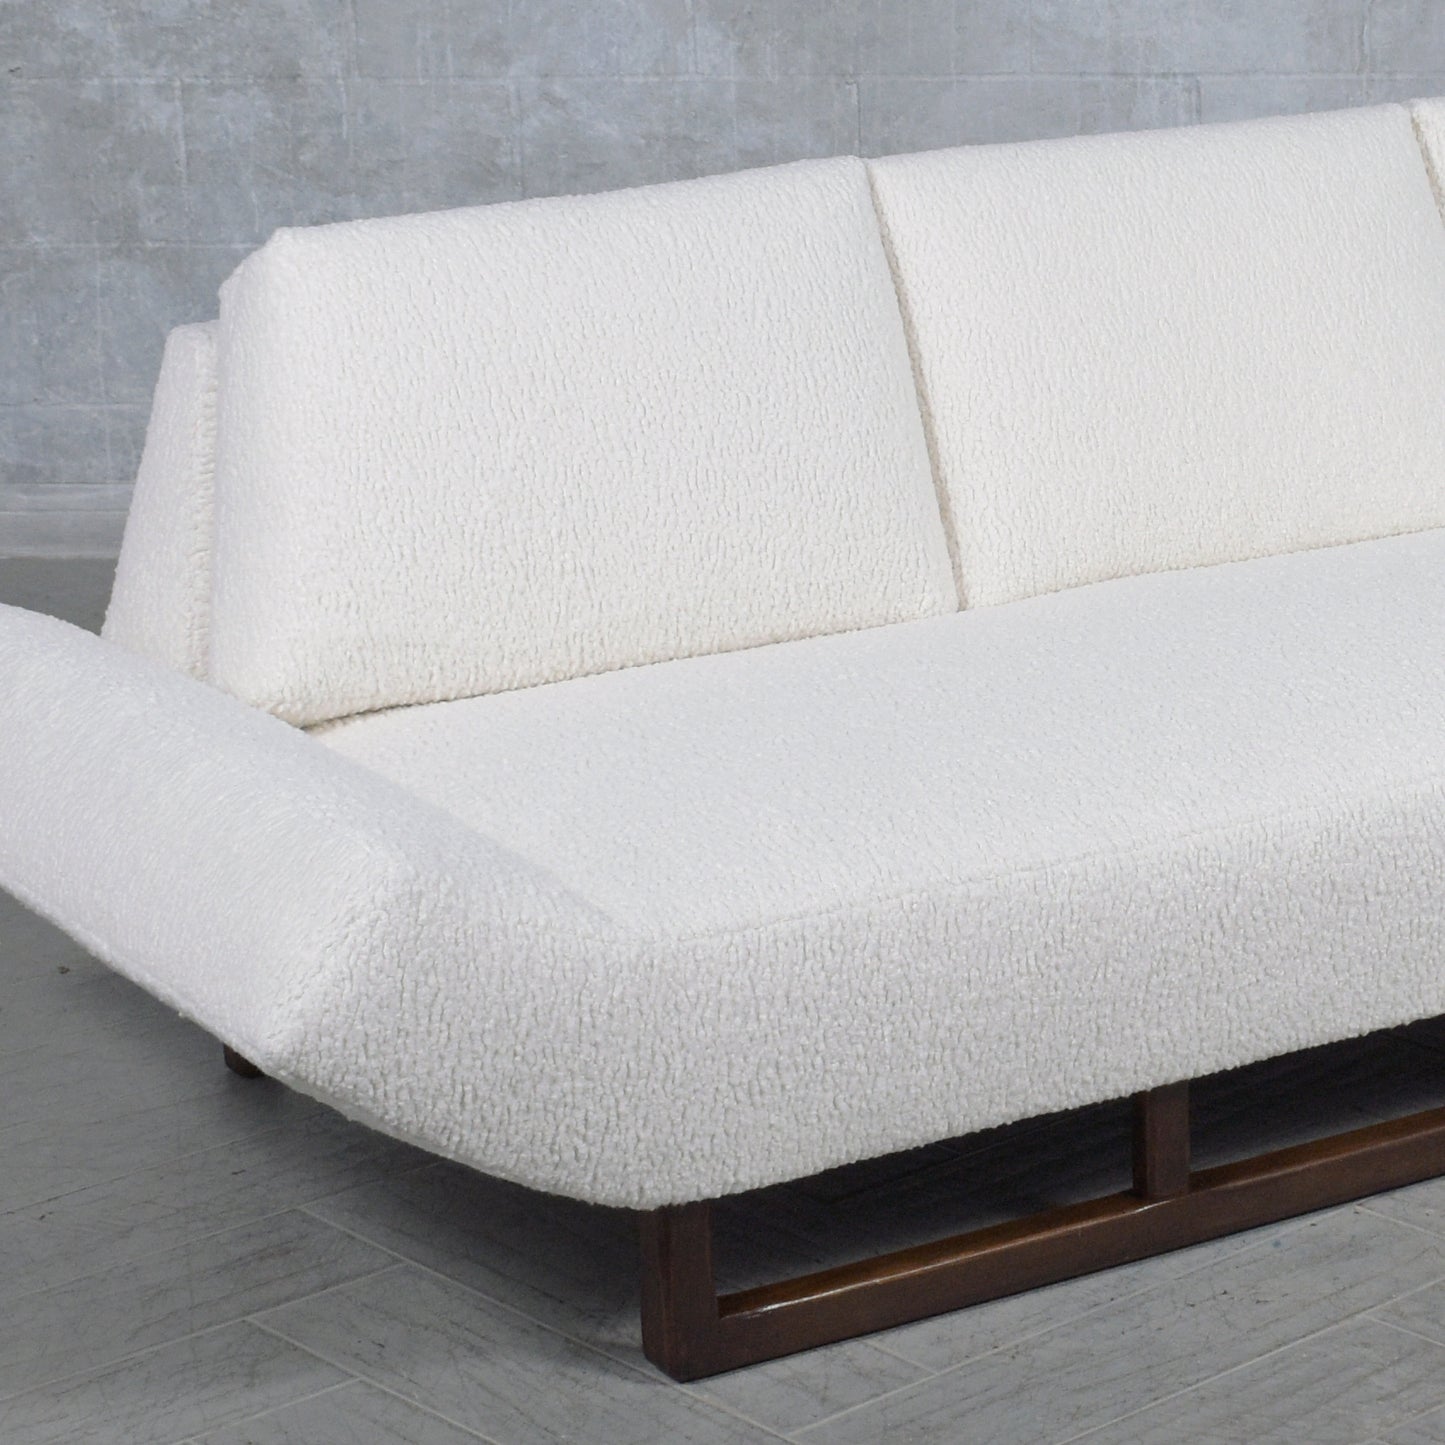 Restored Vintage 1960s Mid-Century Sofa with Geometric Design and Bouclé Fabric